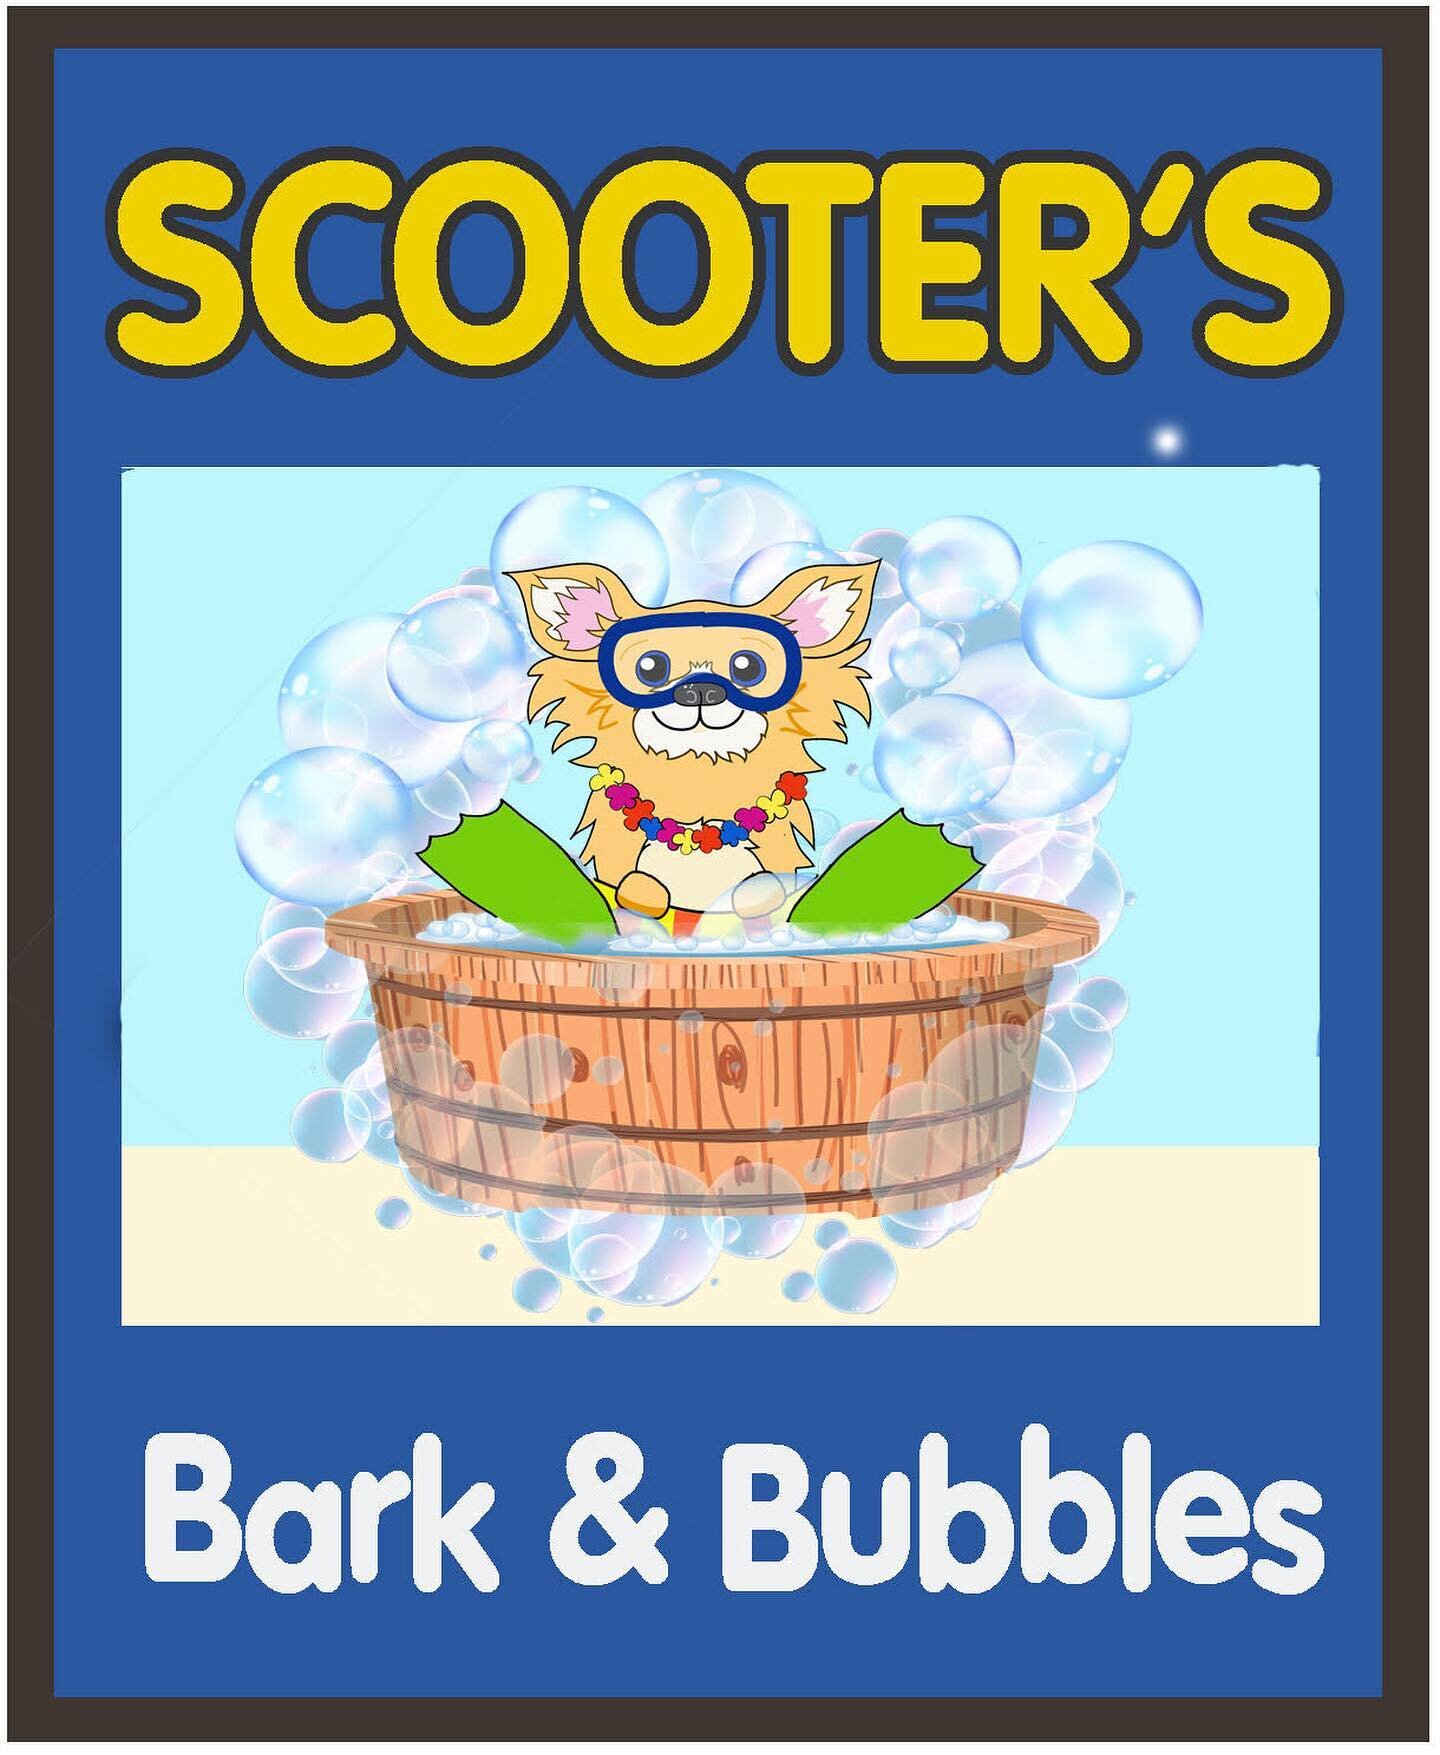 Scooter's Bark & Bubbles  Just another WordPress site